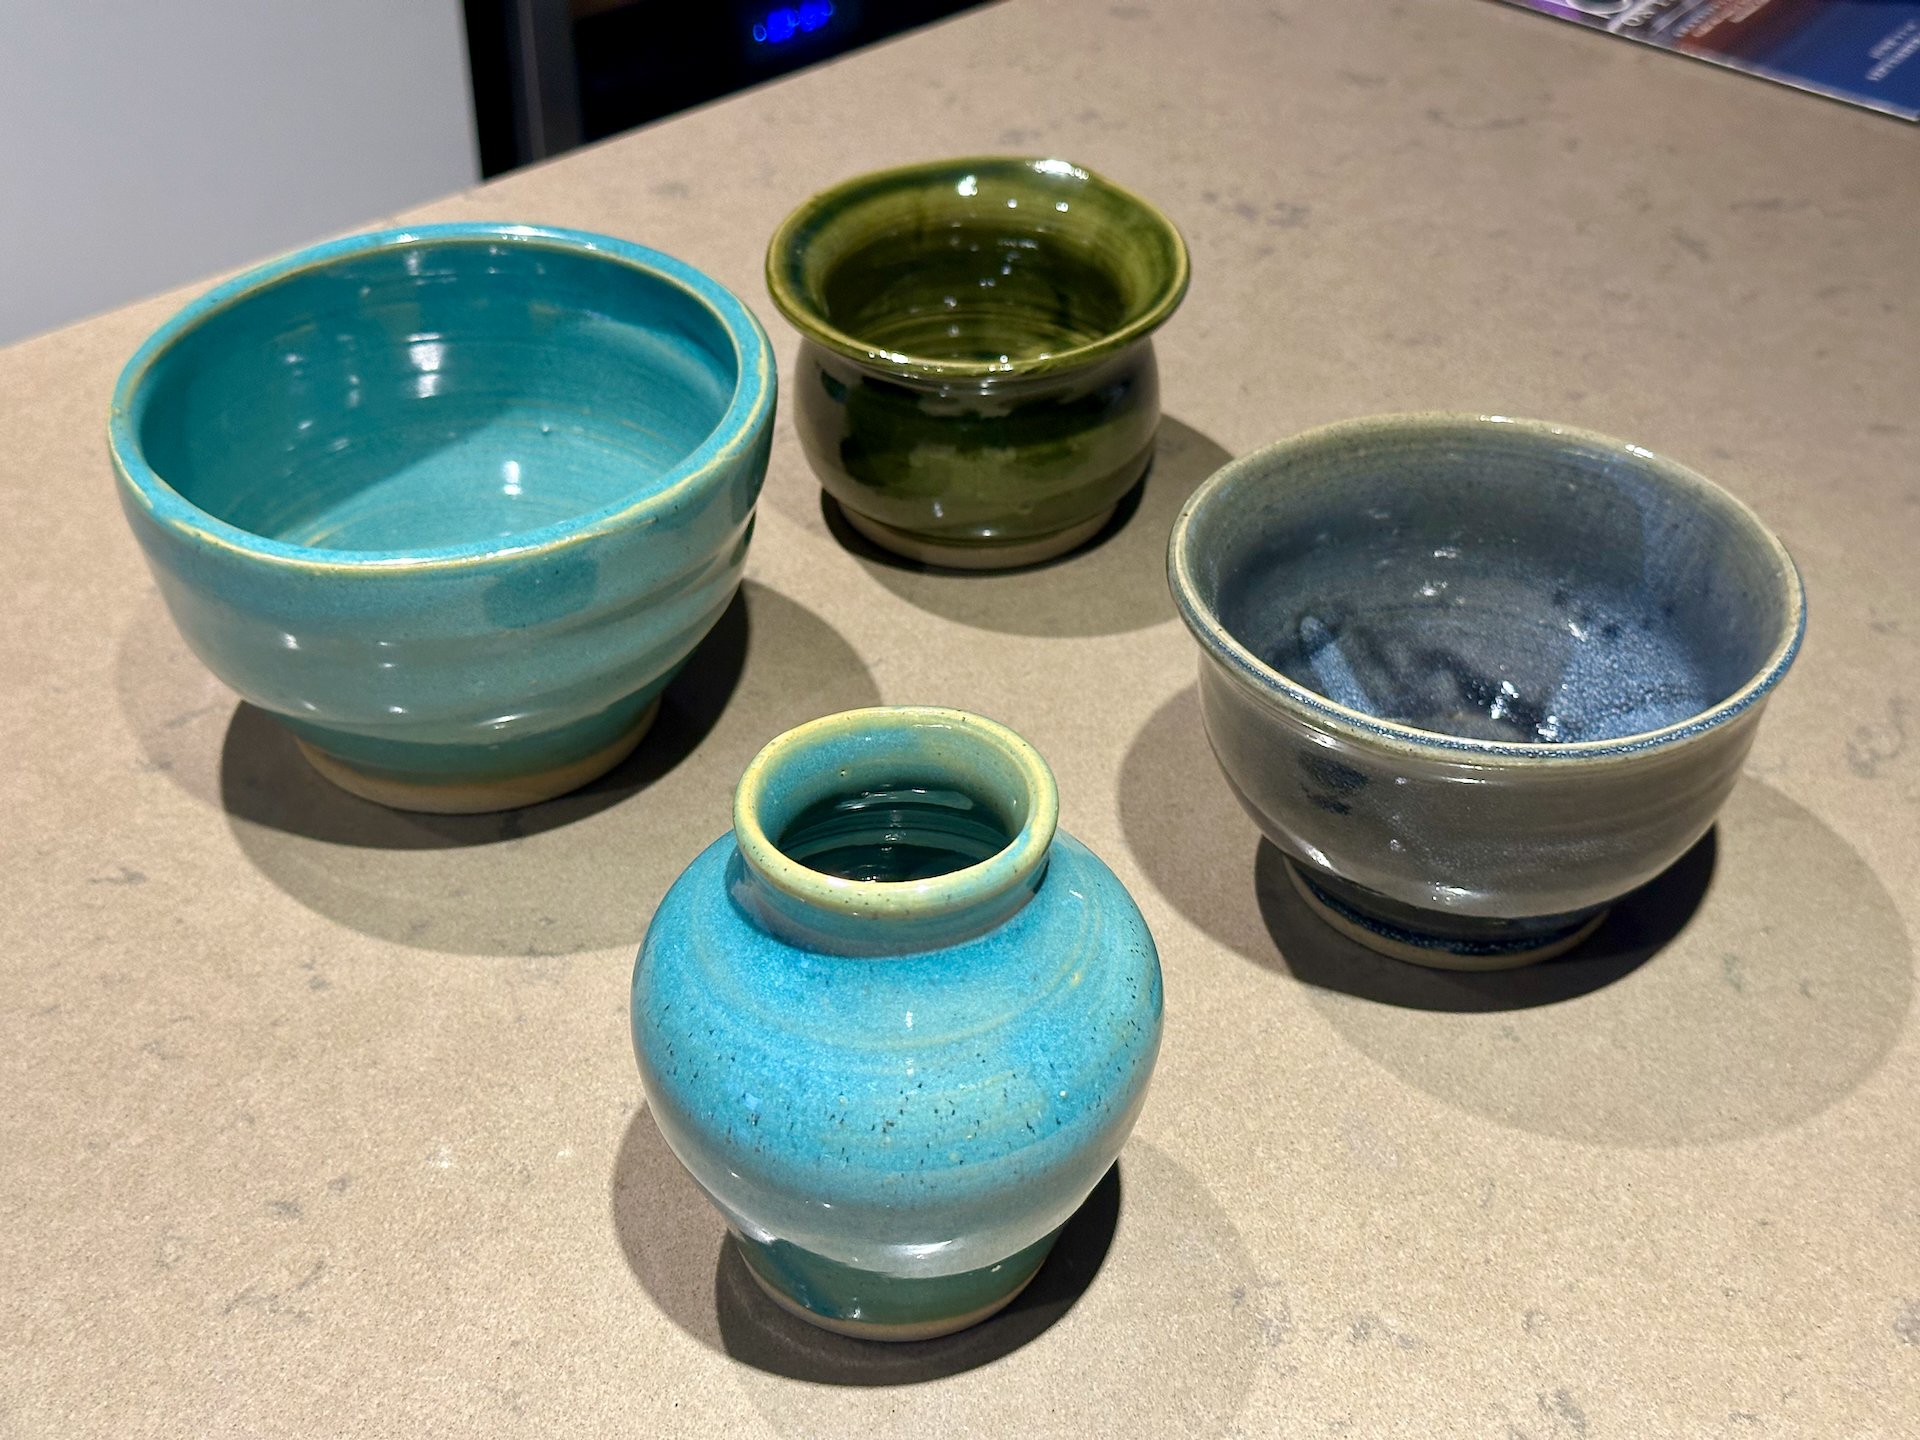  And here are the finished pieces! The glazes look nice, and while they may not be the most consistently thrown pieces of pottery you’ll ever find, I think they came out pretty well.  